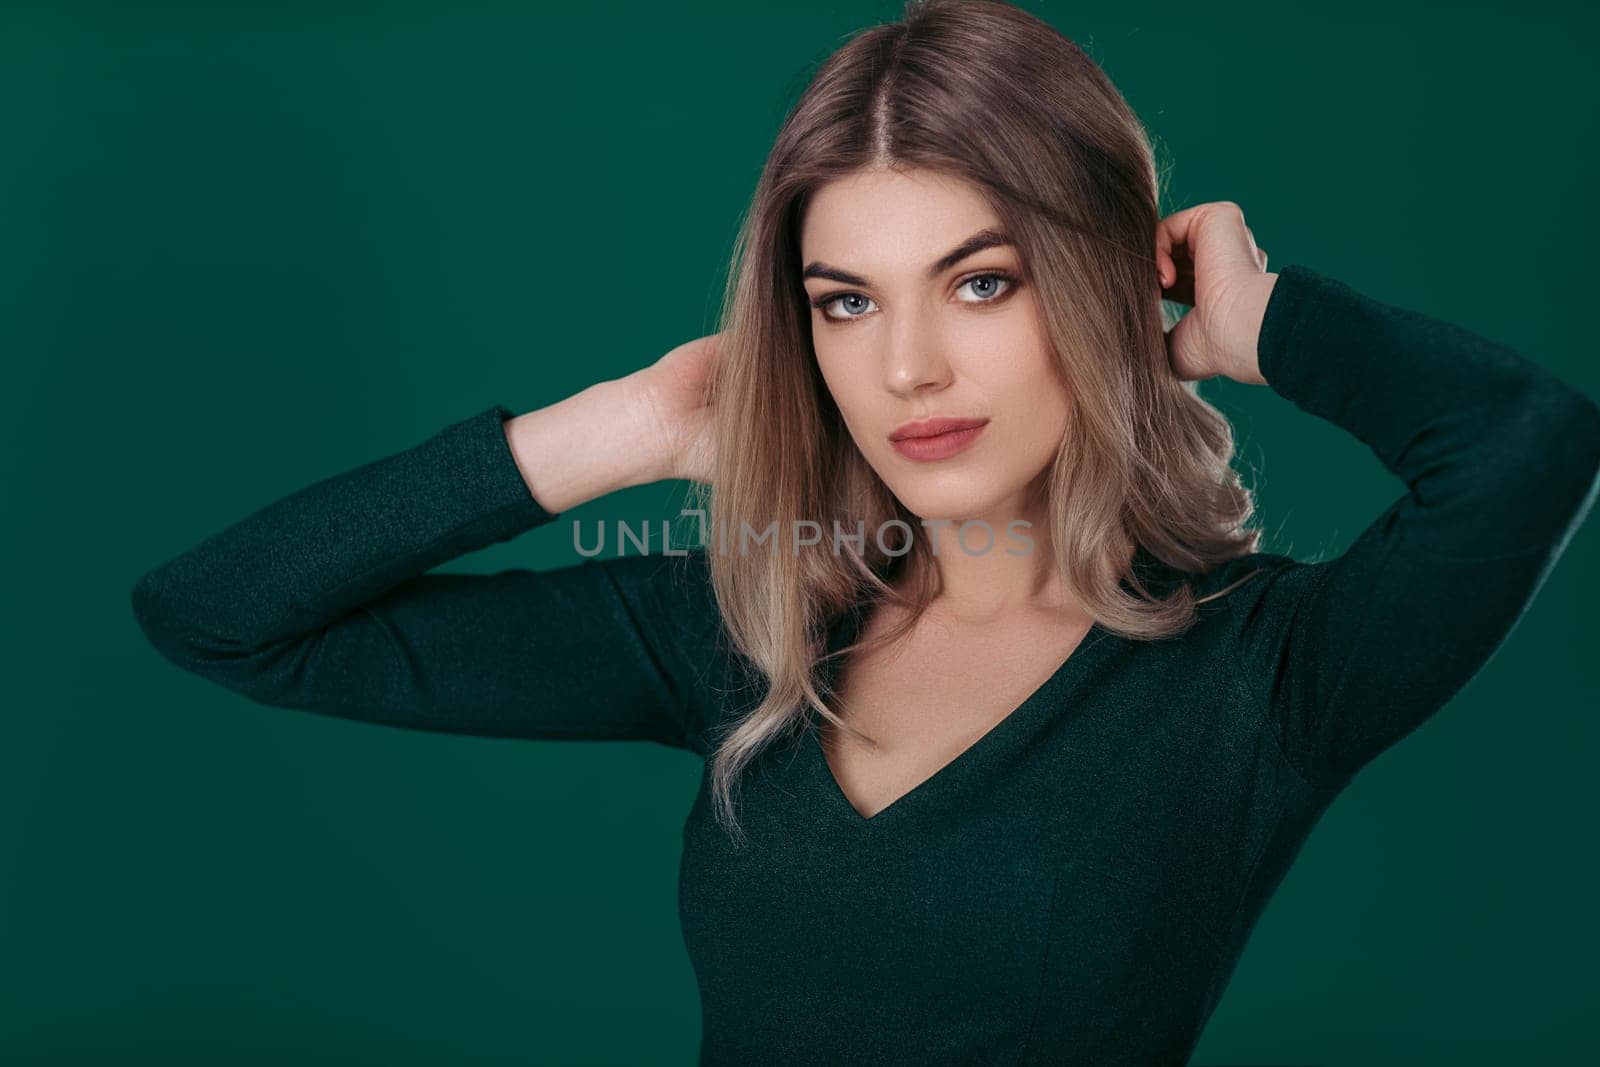 Sensual beautiful blonde woman looking at camera and posing in green dress on green background